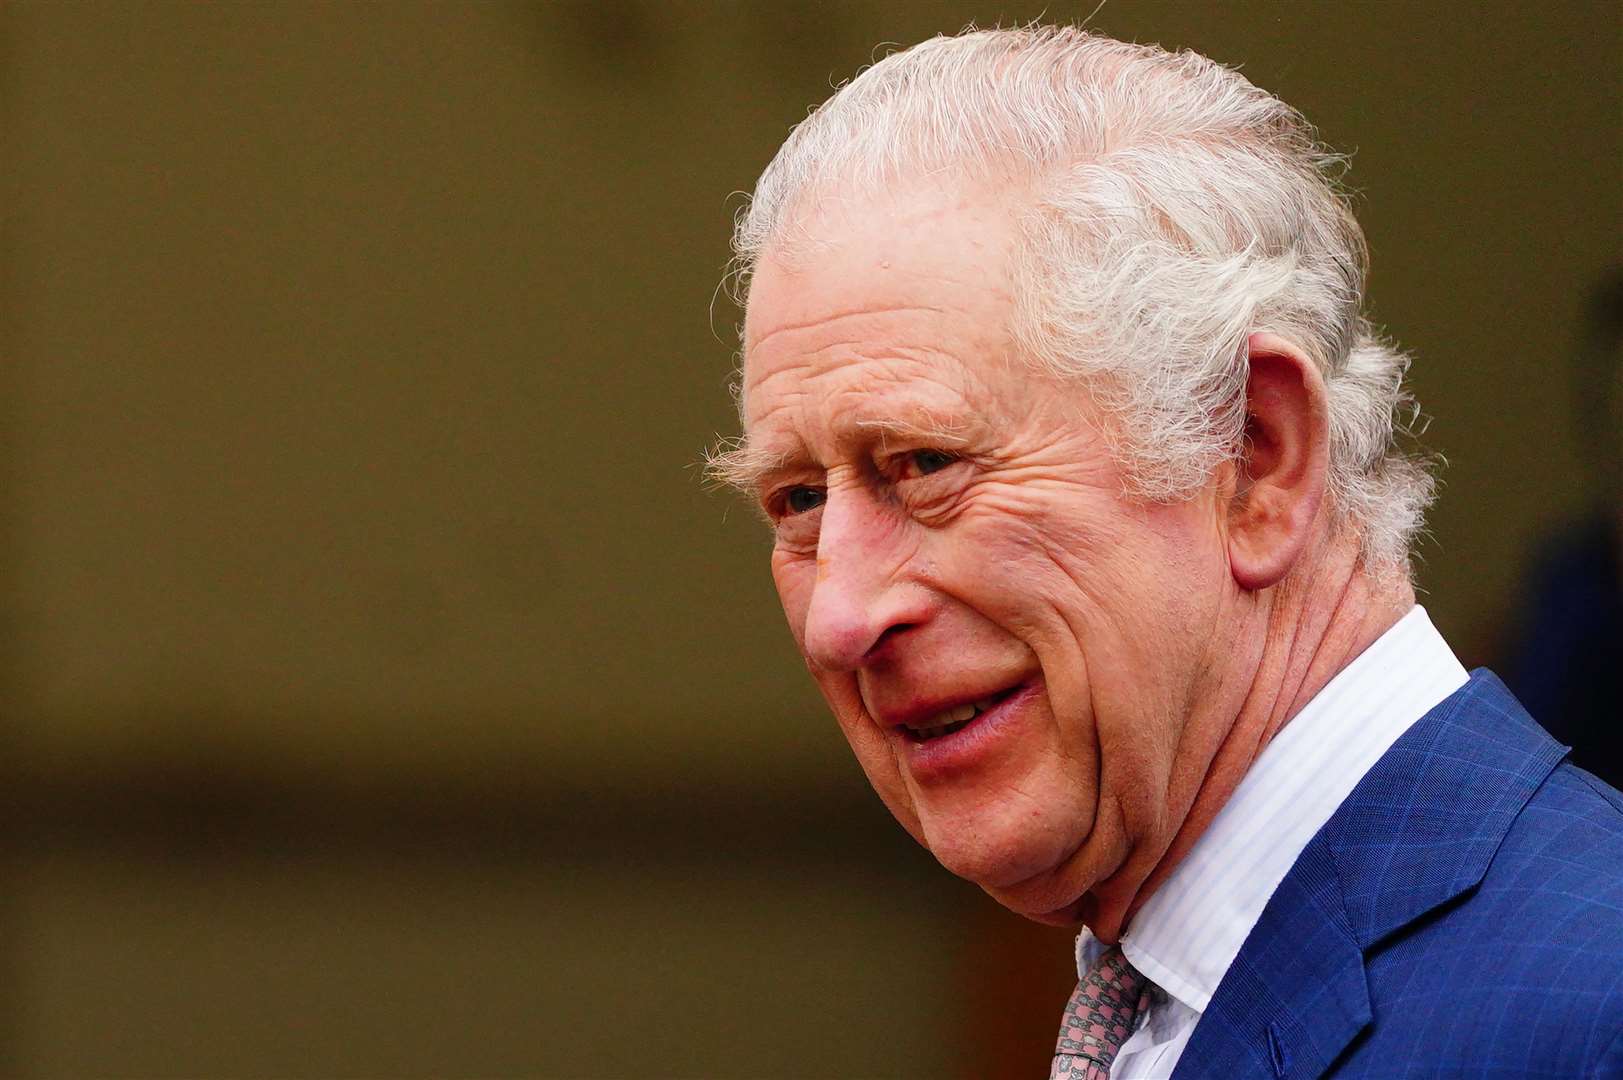 The King was said to be due to meet the European Commission president at Windsor before it was called off (Victoria Jones/PA)